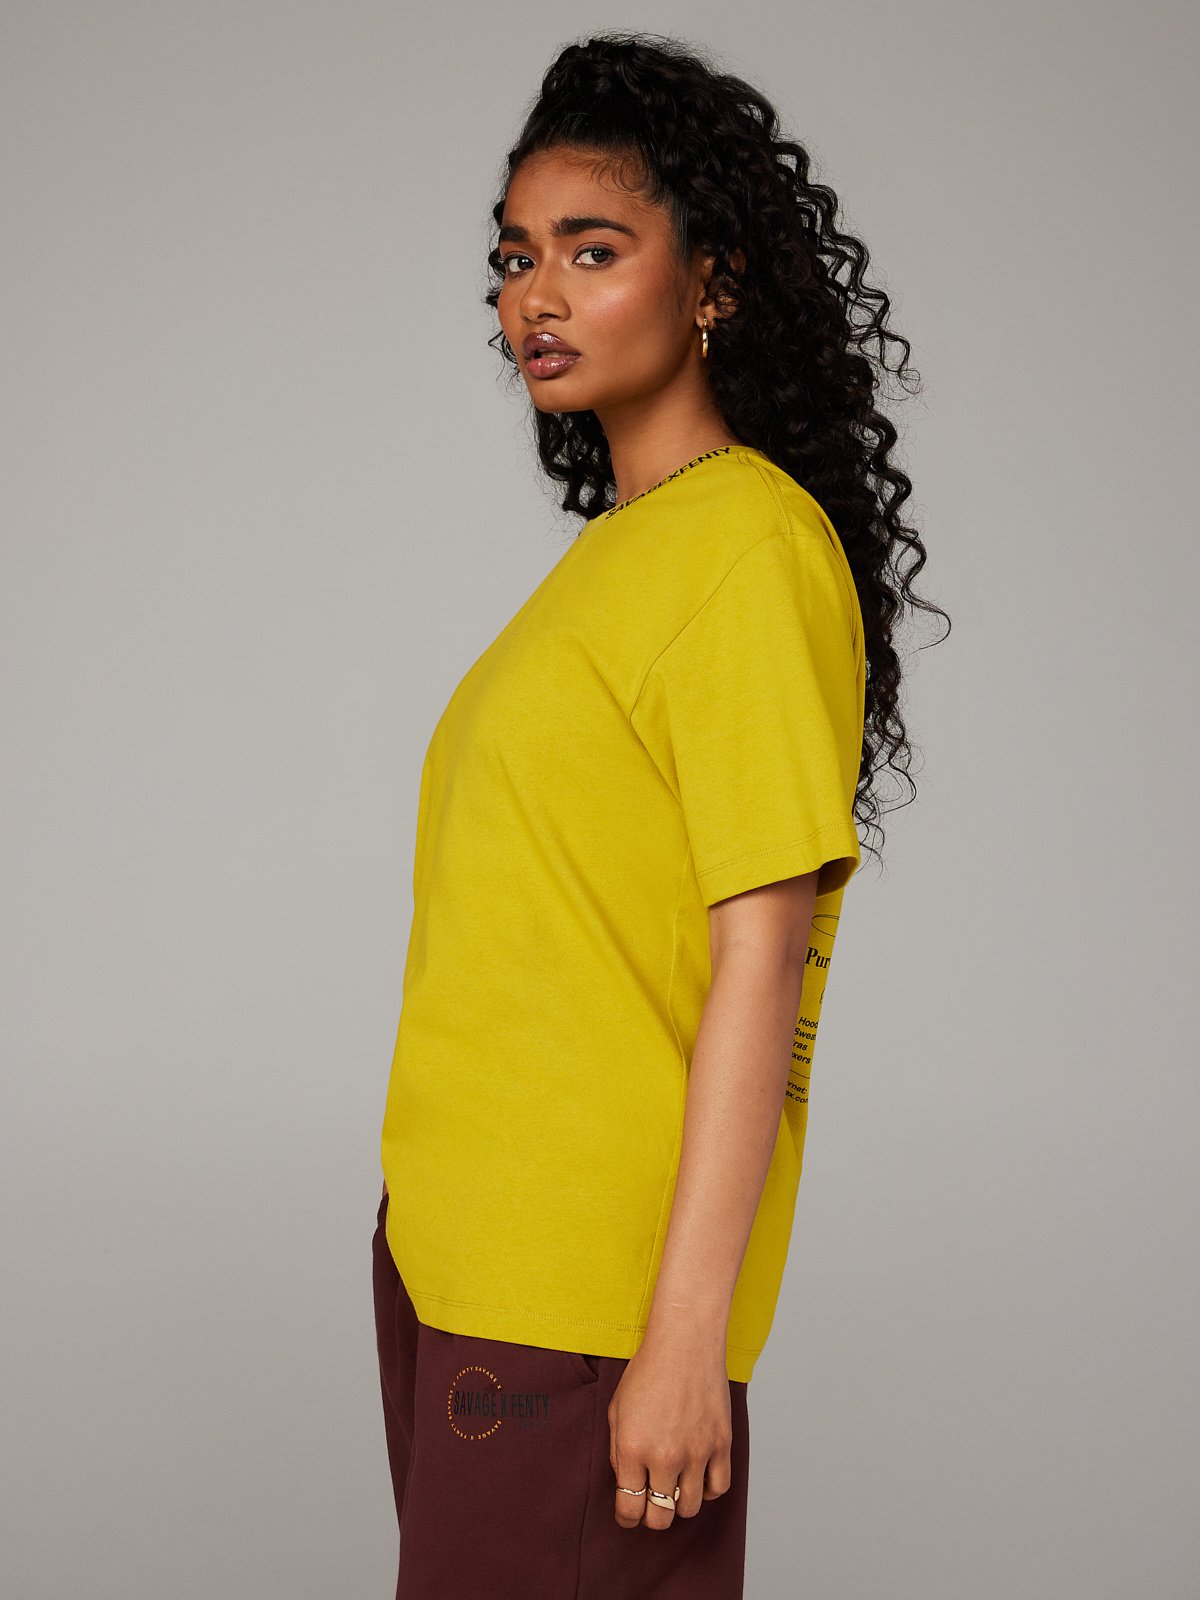 Grille Graphic Tee in Gold & Yellow | SAVAGE X FENTY